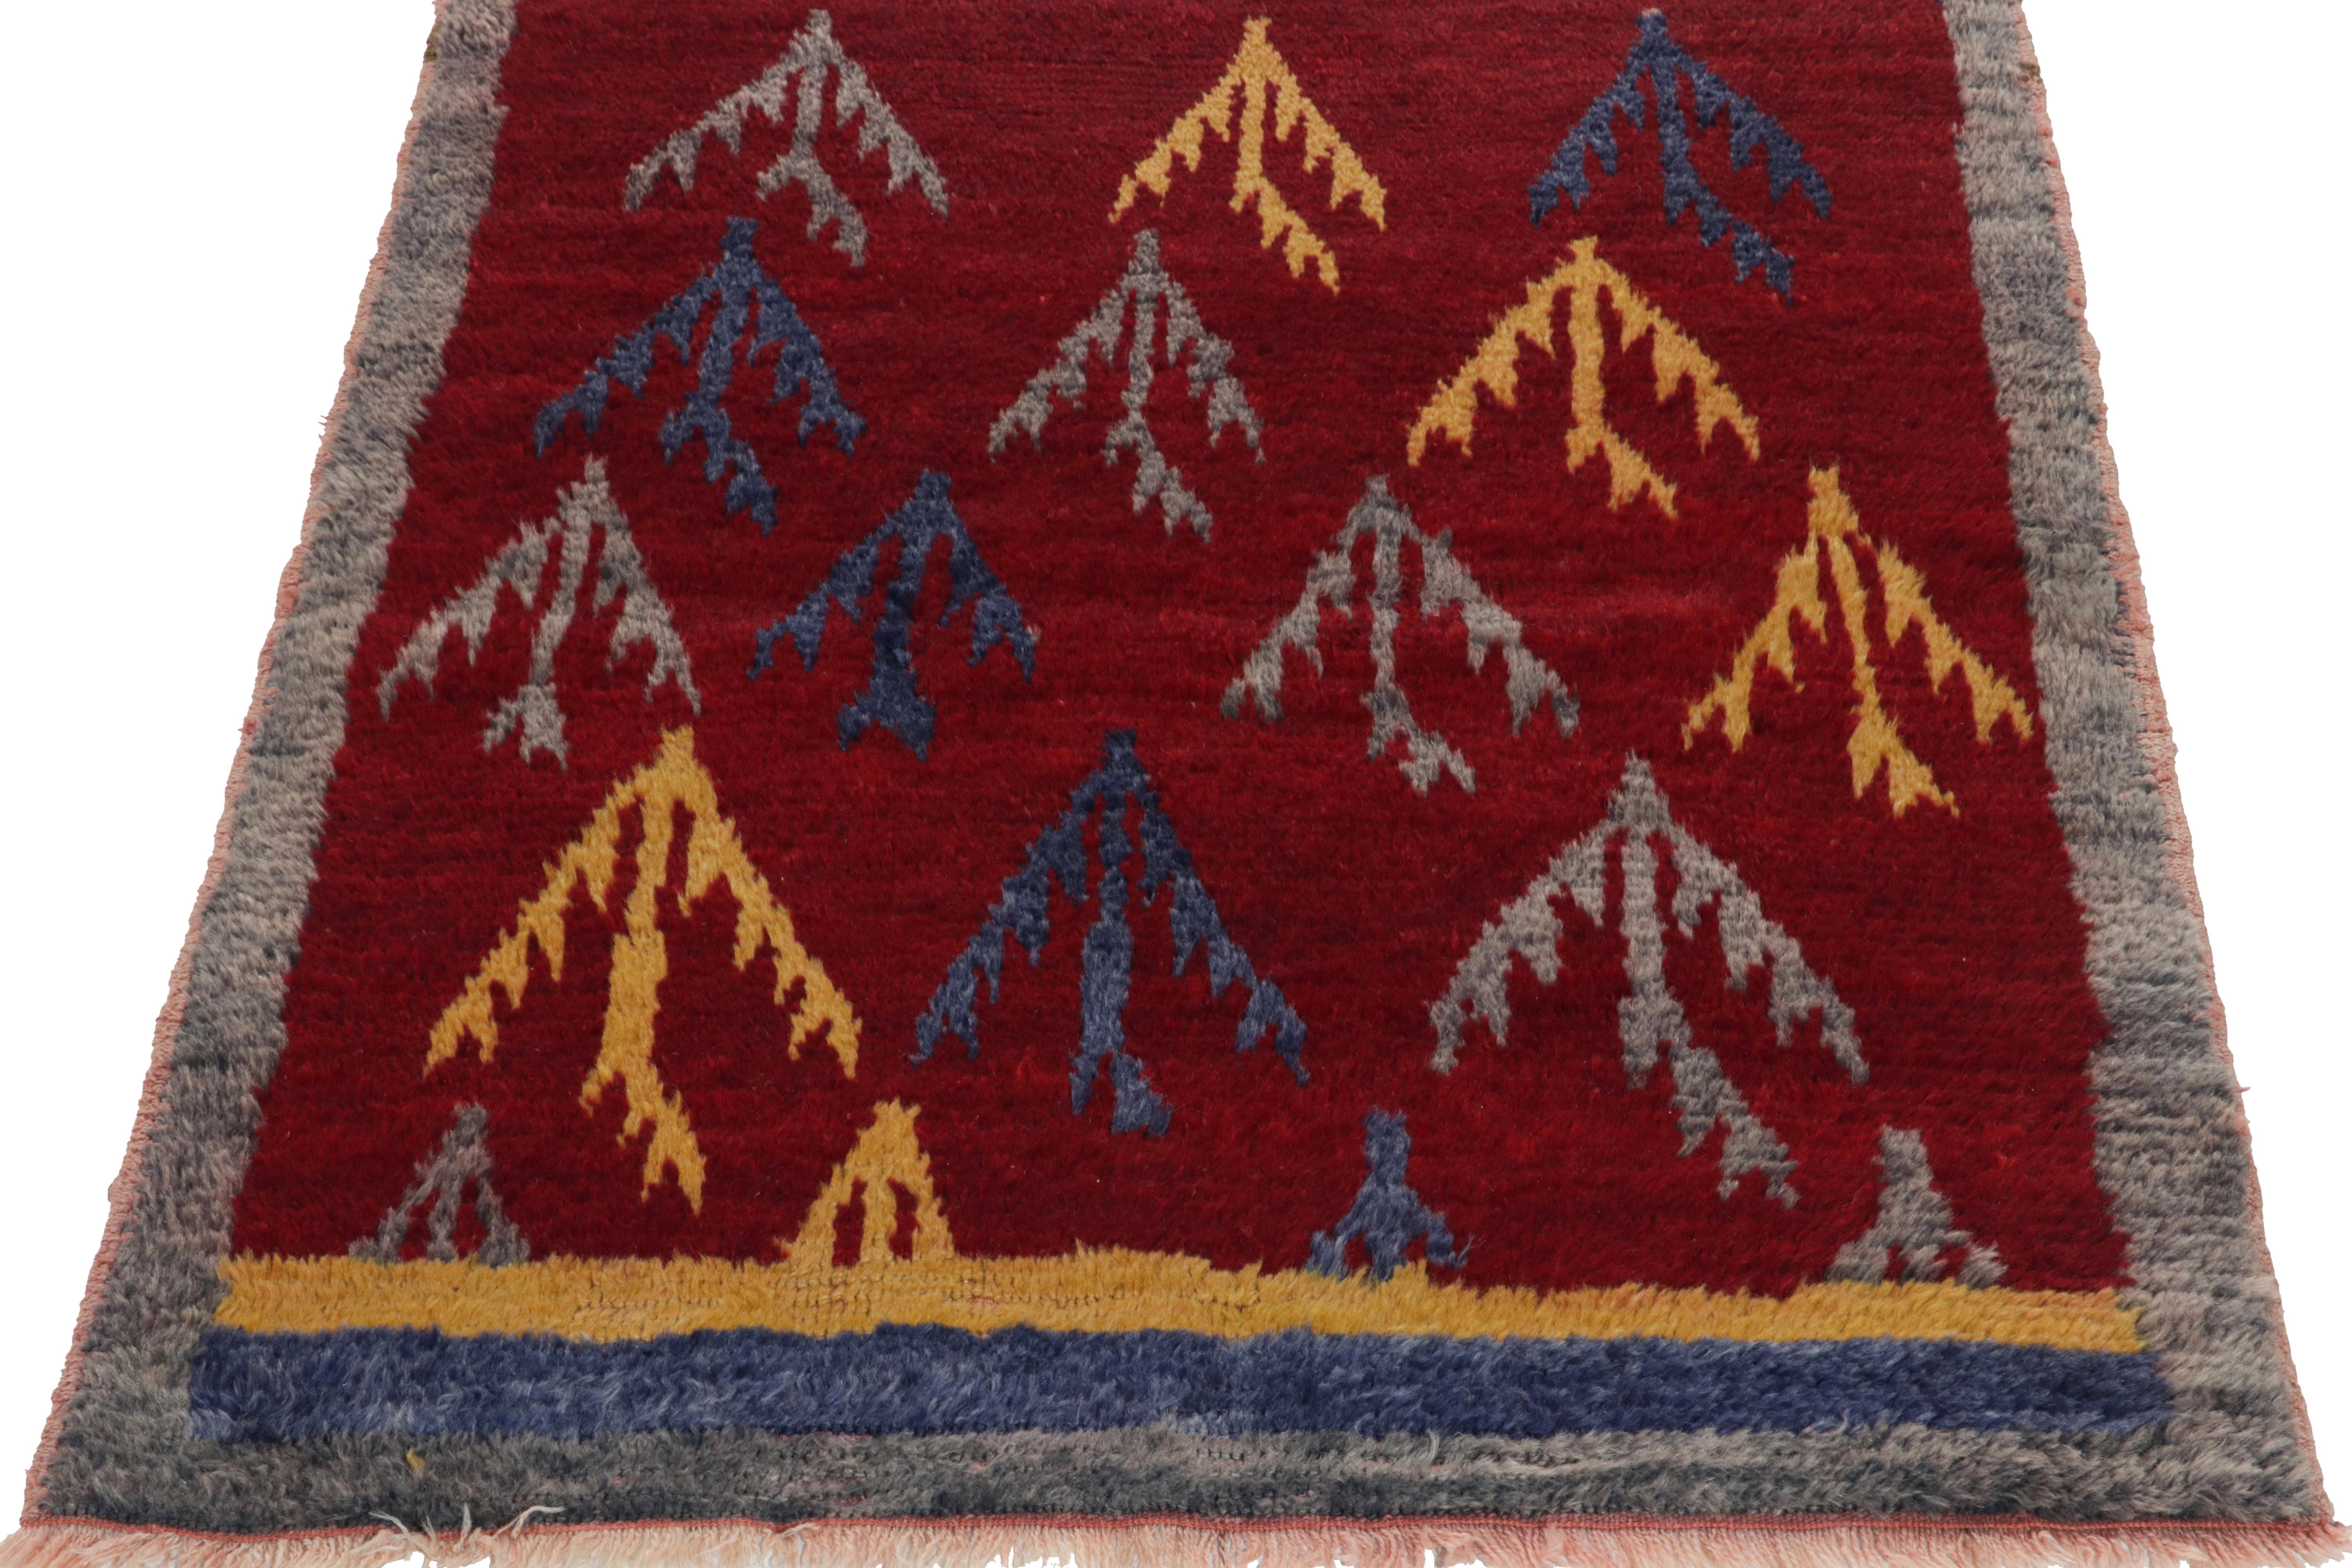 A 3x4 vintage Tulu shag rug from Turkey entering Rug & Kilim’s Antique & Vintage collection featuring sharp tribal motifs in yellow, grey & blue on a luscious red backdrop. The rug further enjoys slate gray on the border with fine fringes in white &